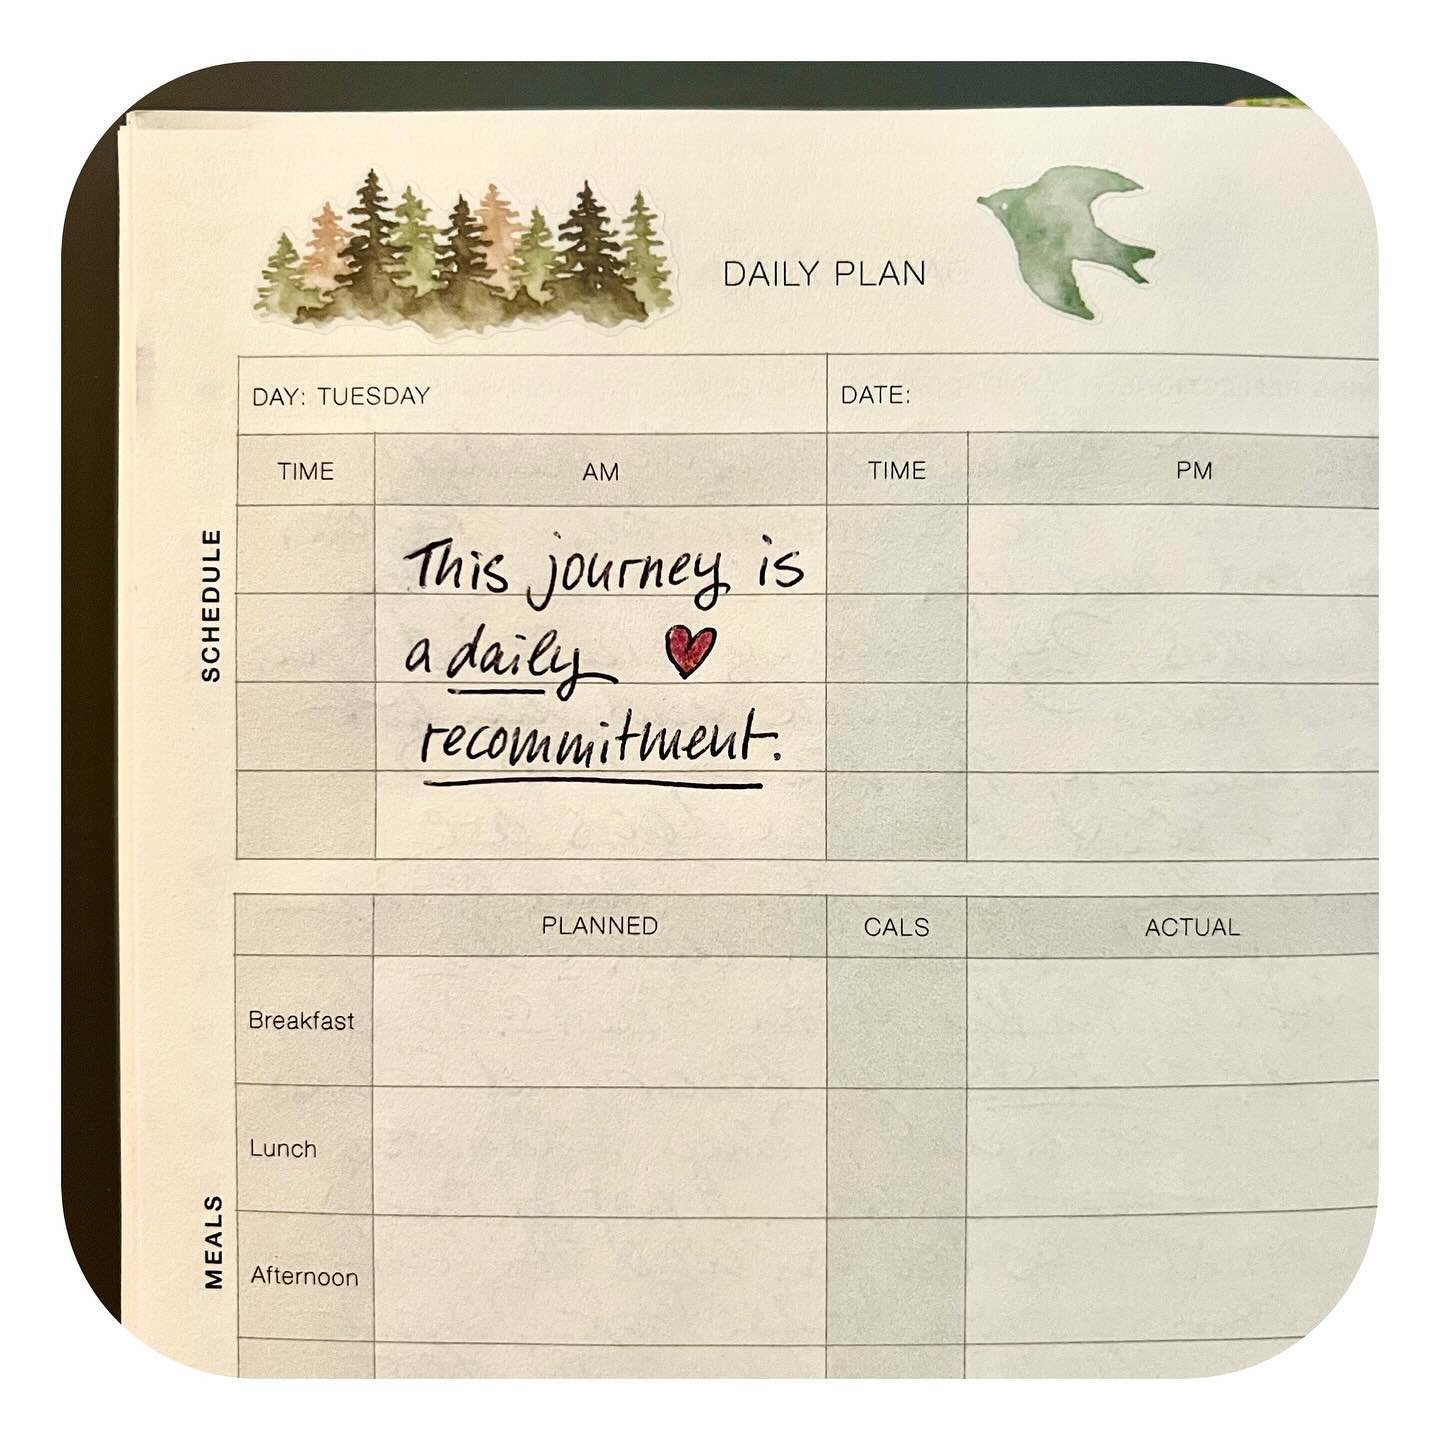 As I was decorating my planner pages for tomorrow (favorite part of my evening rituals), I added a little reminder for myself because sometimes I really need one. 

What also helps&hellip; when your astrologer sends you this message out of the blue:
